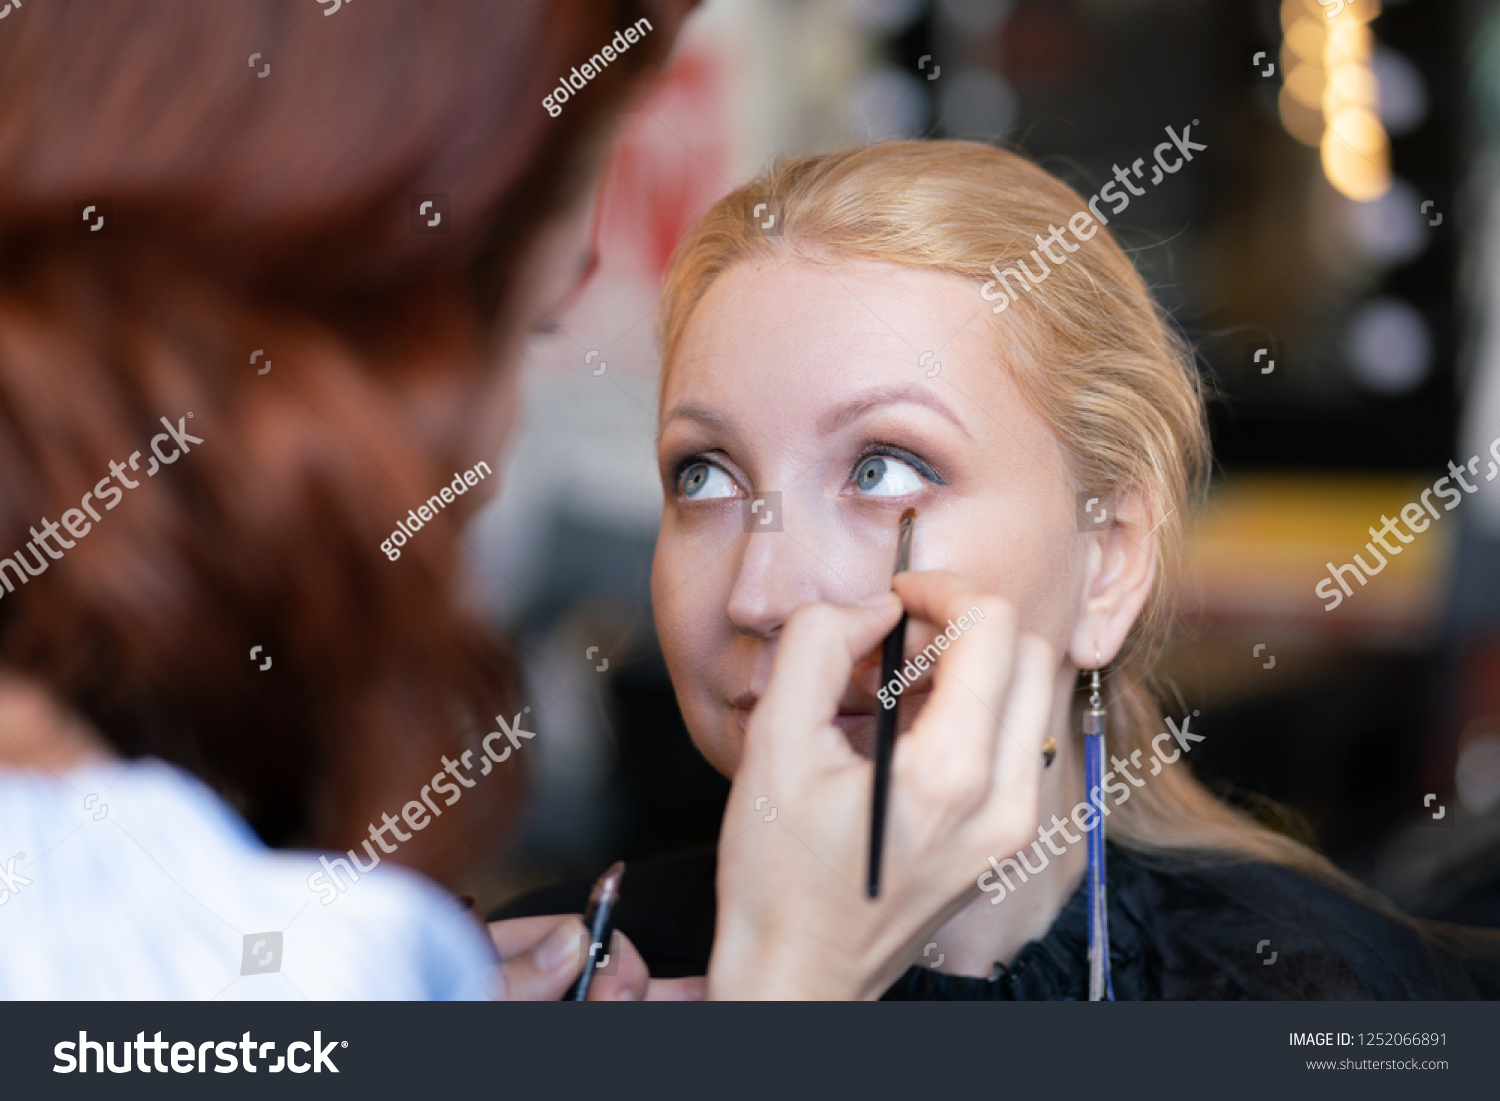 professional makeup artist applies makeup step by step on the face of a woman blonde #1252066891